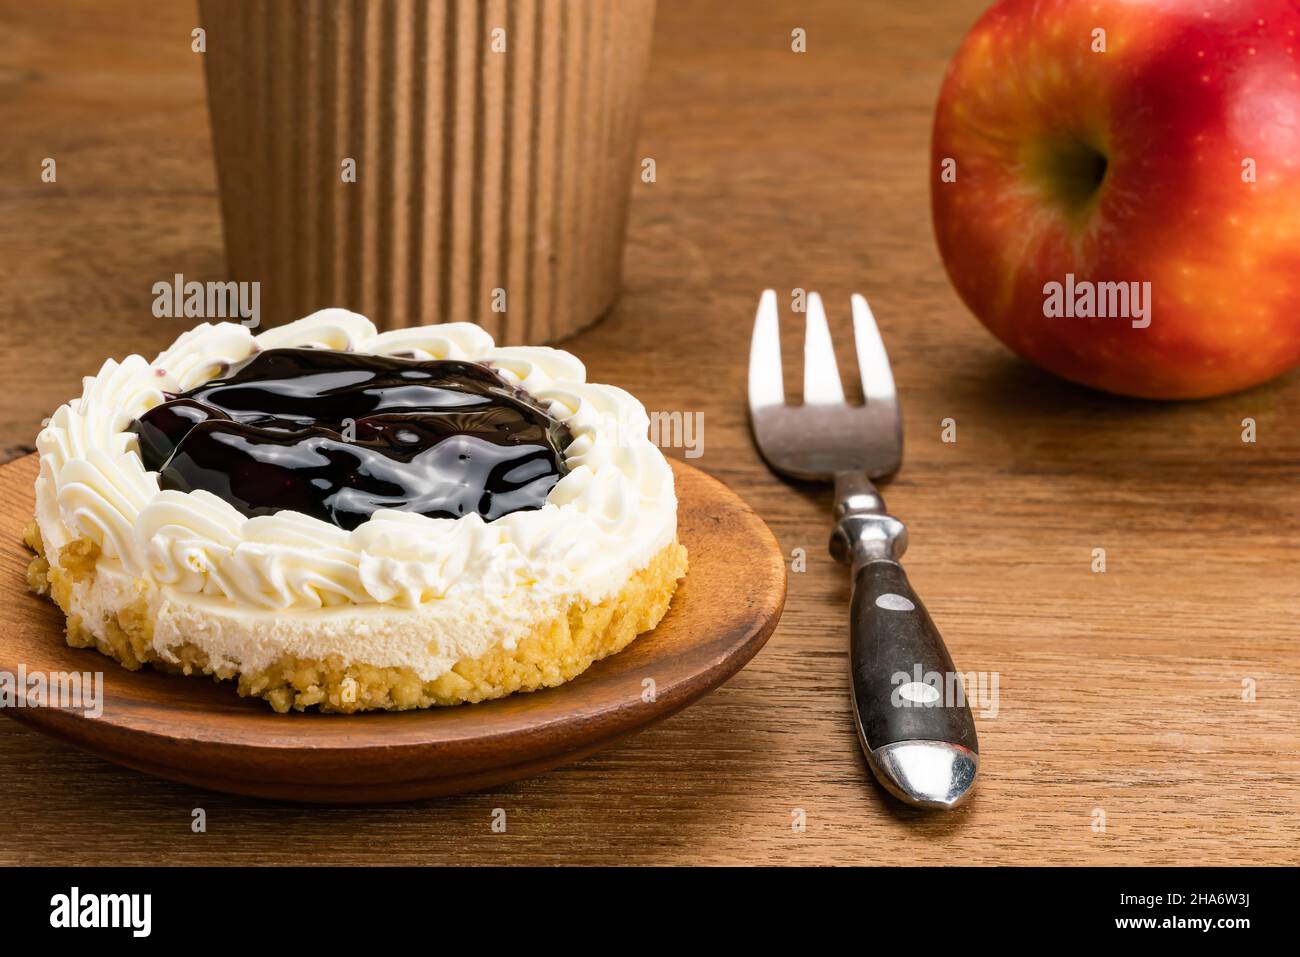 Delicious healthy breakfast of Blueberry Cheese Pie on wooden plate with metal fork, coffee cup and ripe red apple on wooden table. Stock Photo